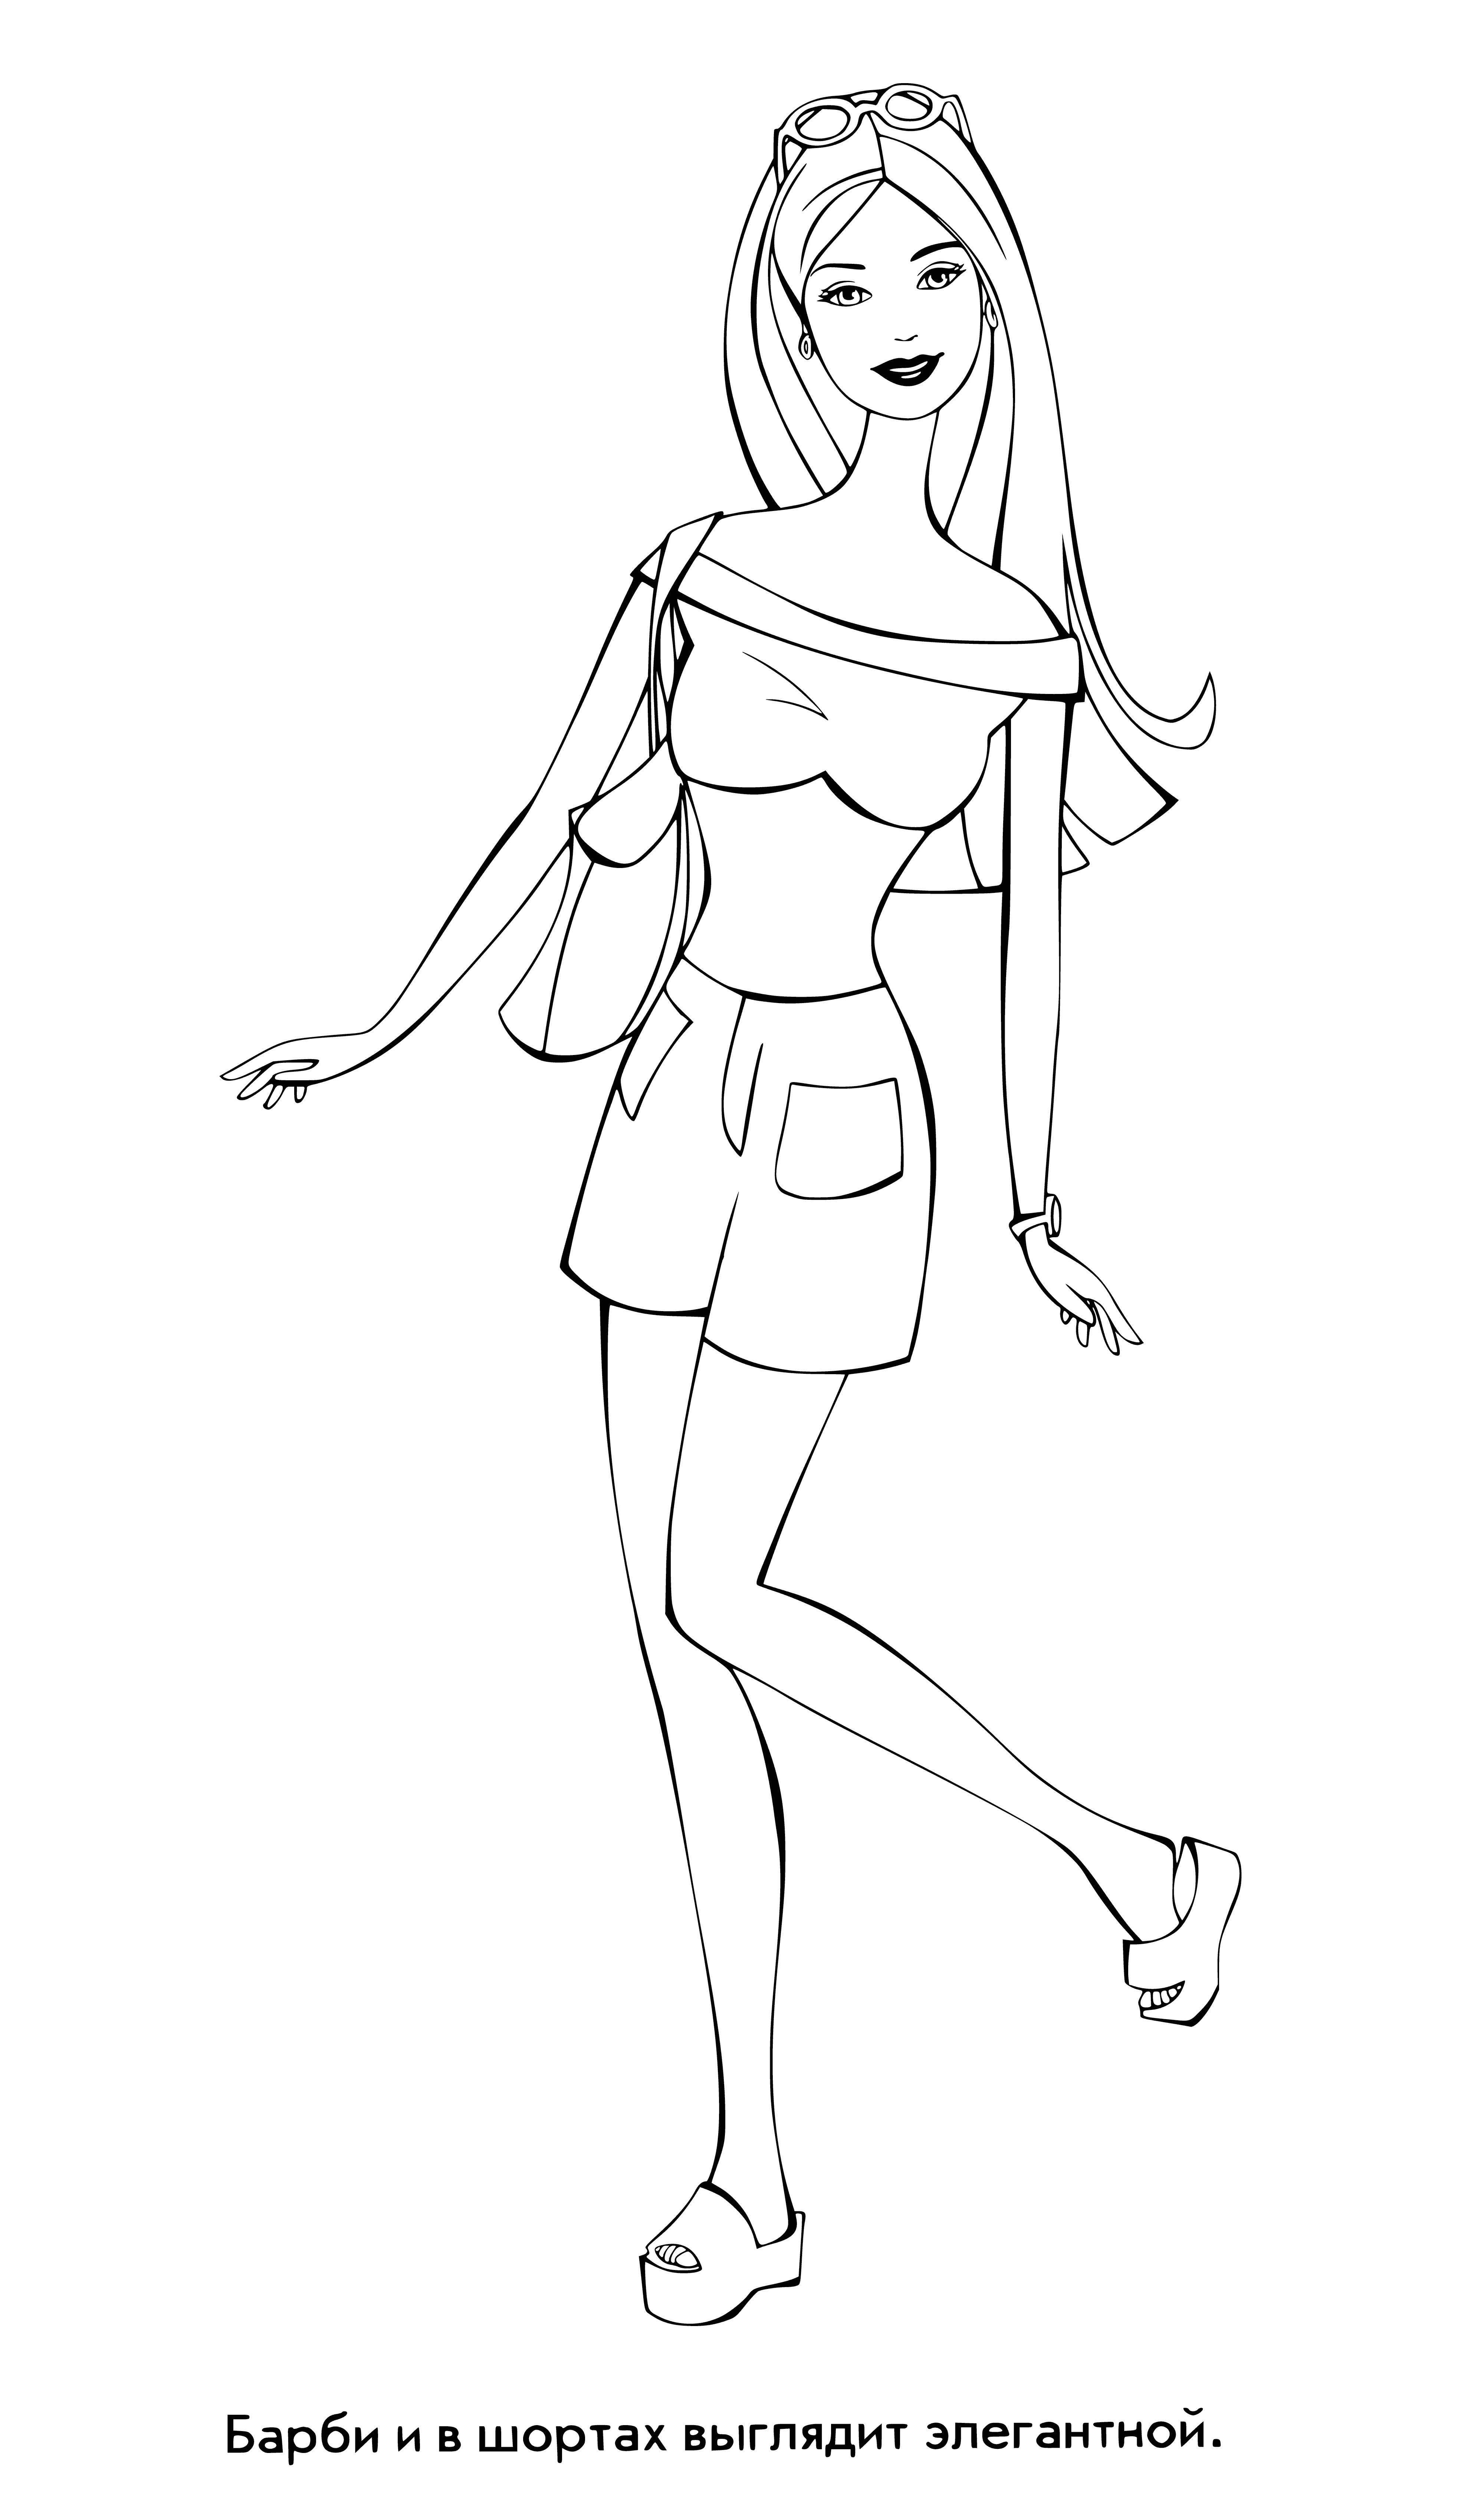 coloring page: Barbie is a doll with long blonde hair, blue eyes and dressed in a pink dress with black belt and shoes.